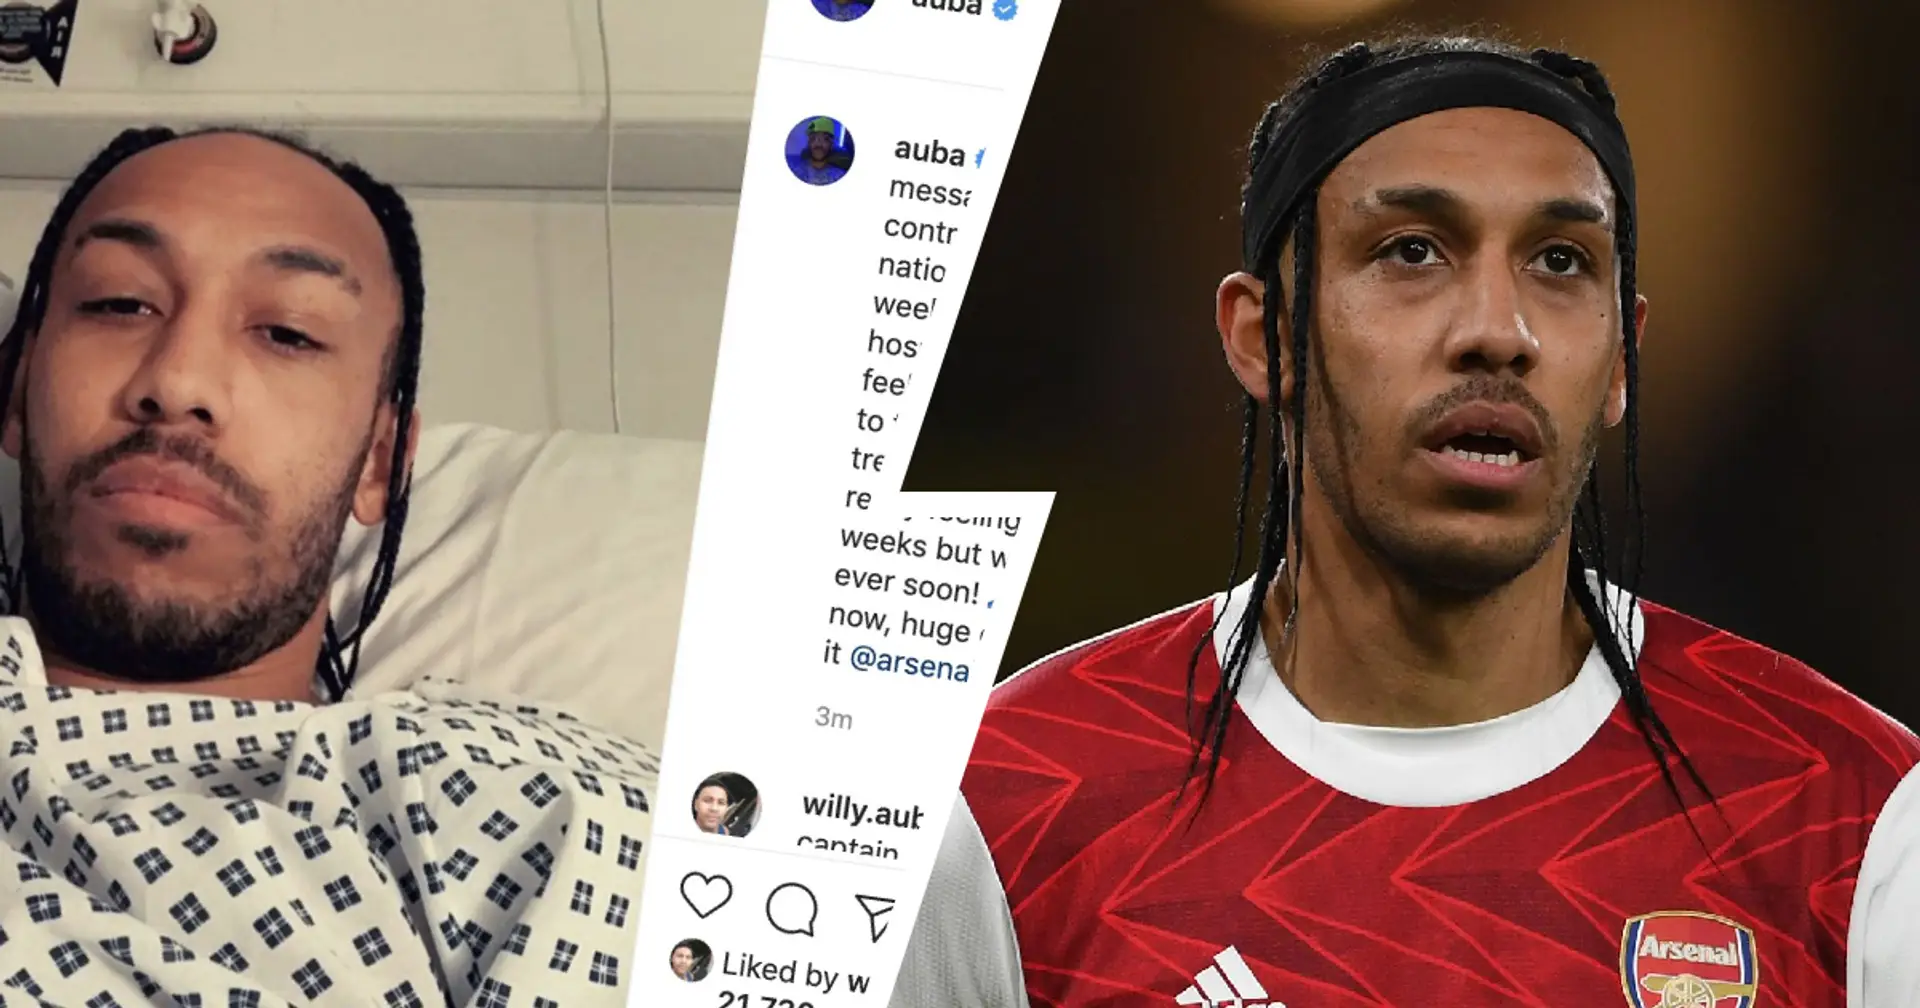 Aubameyang has malaria, provides update on his health in Instagram post